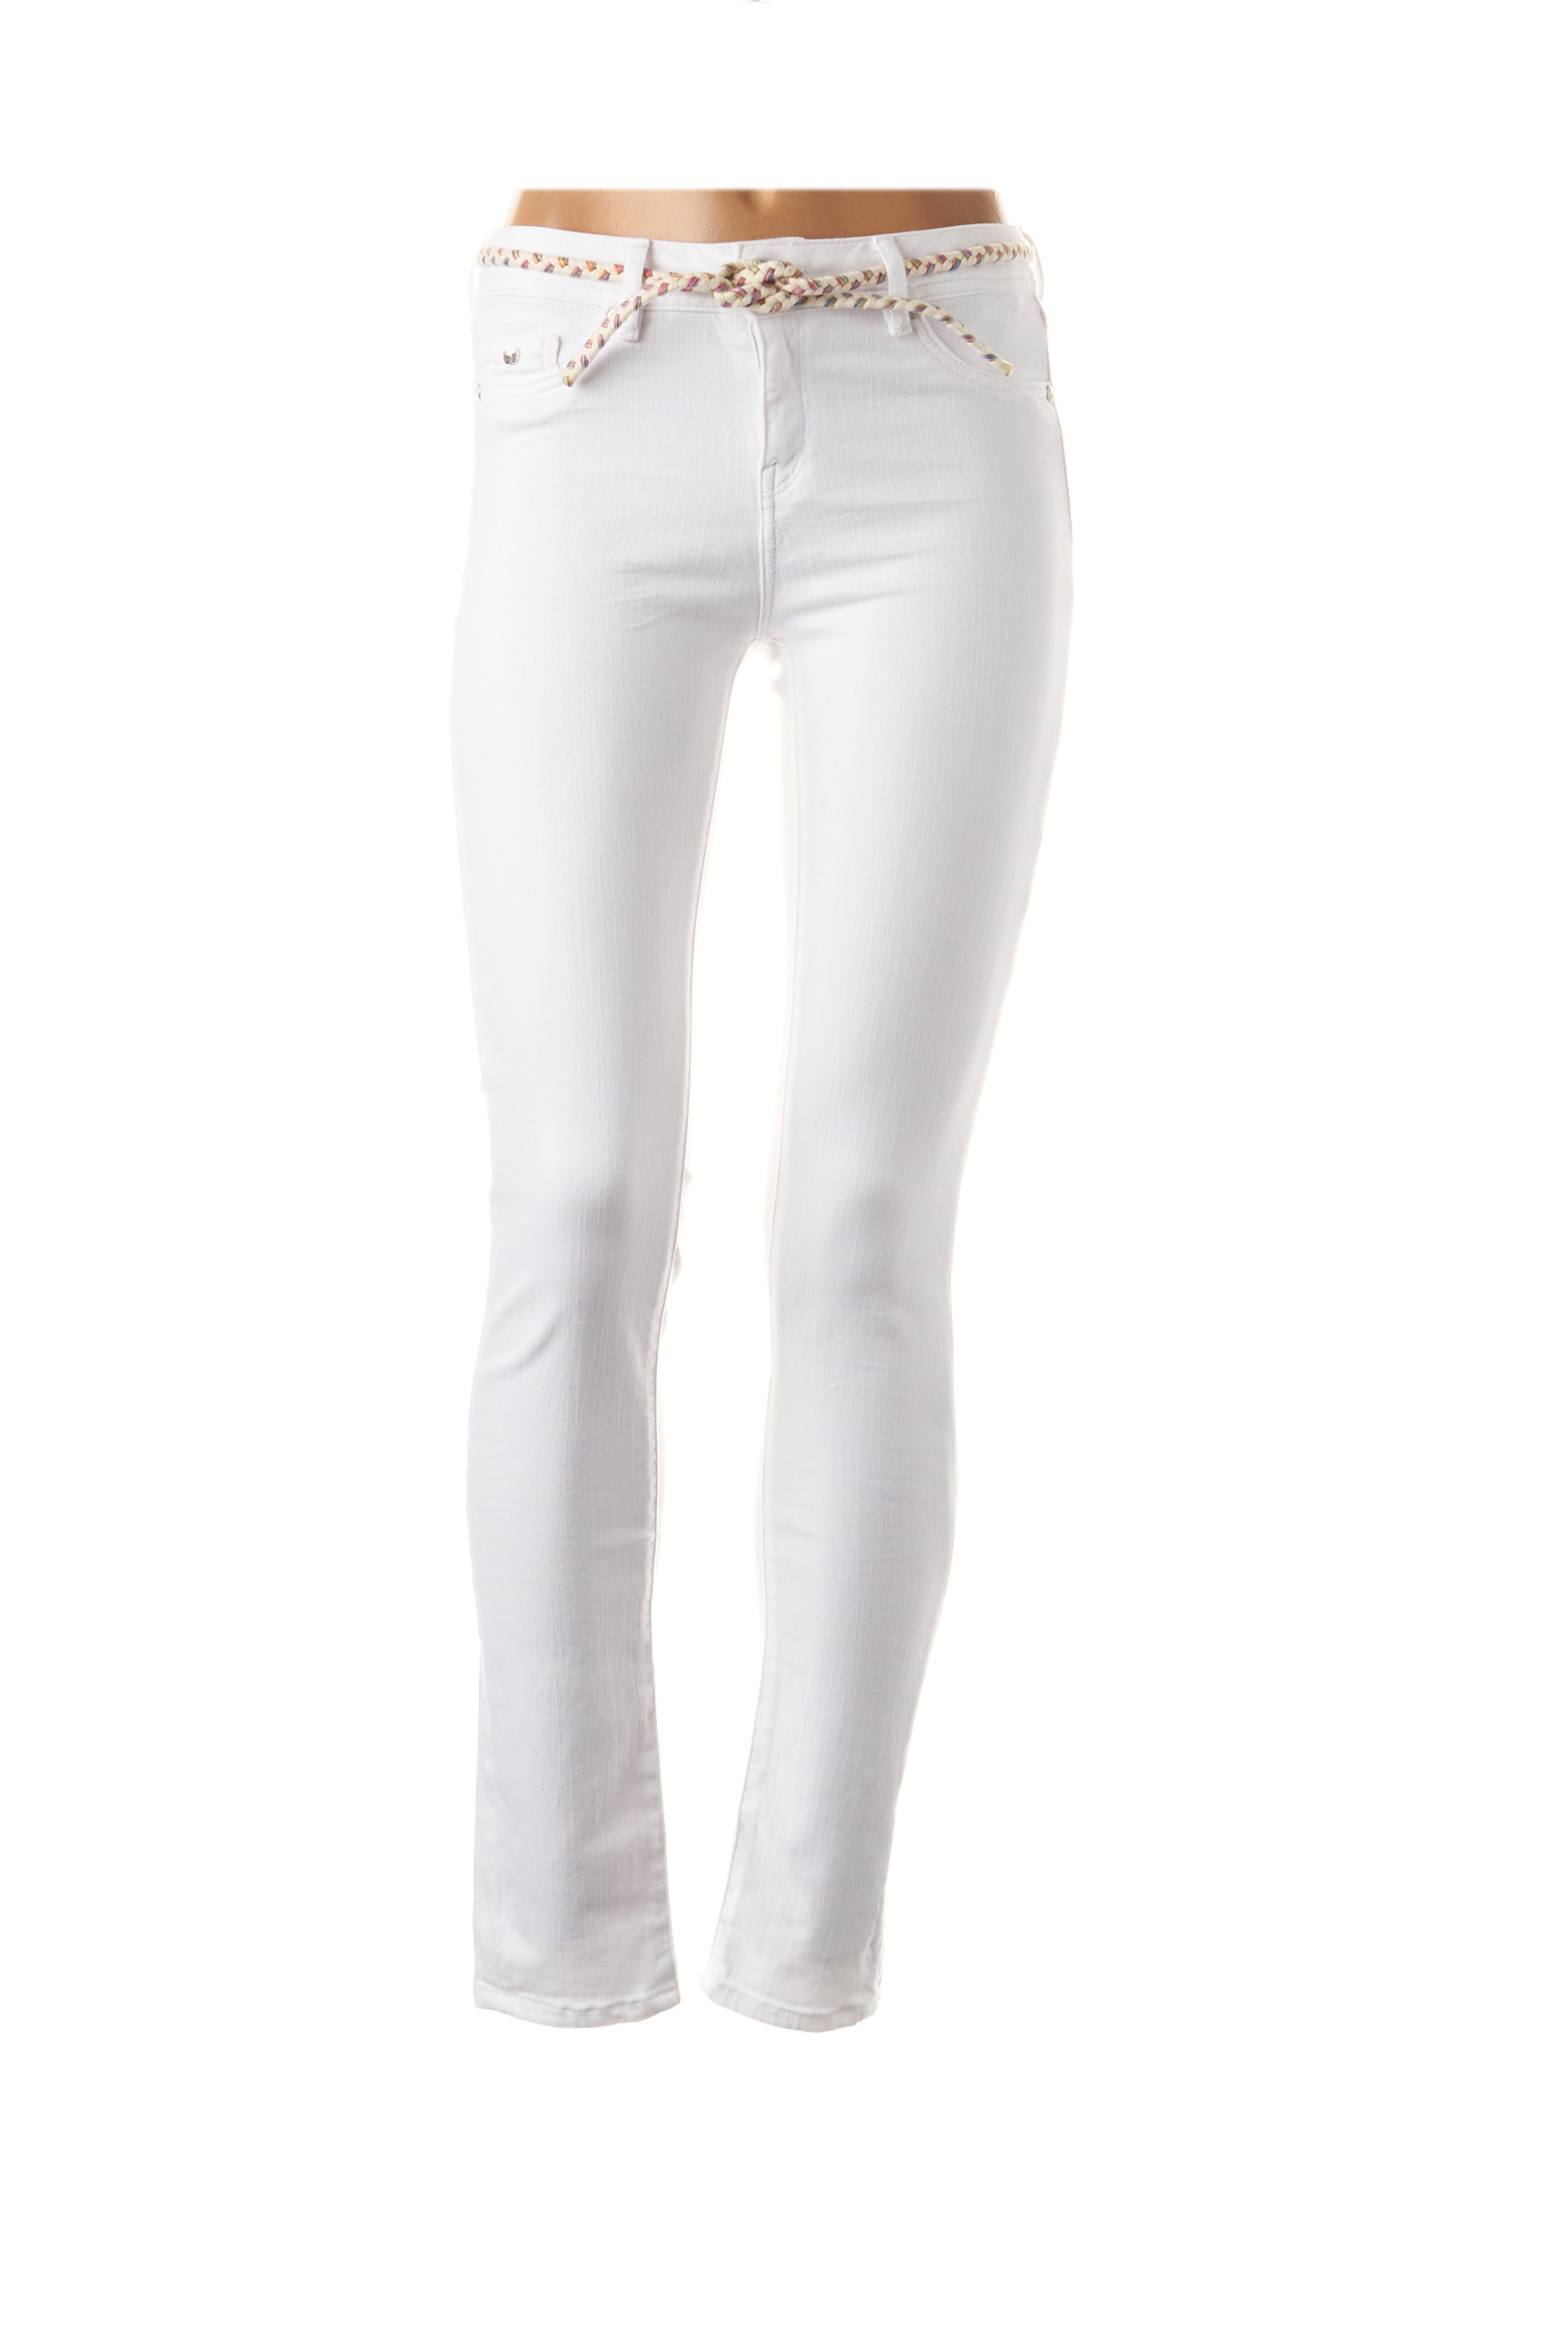 Ouf! 36+ Faits sur Jeans Blanc Femme? Check spelling or type a new ...